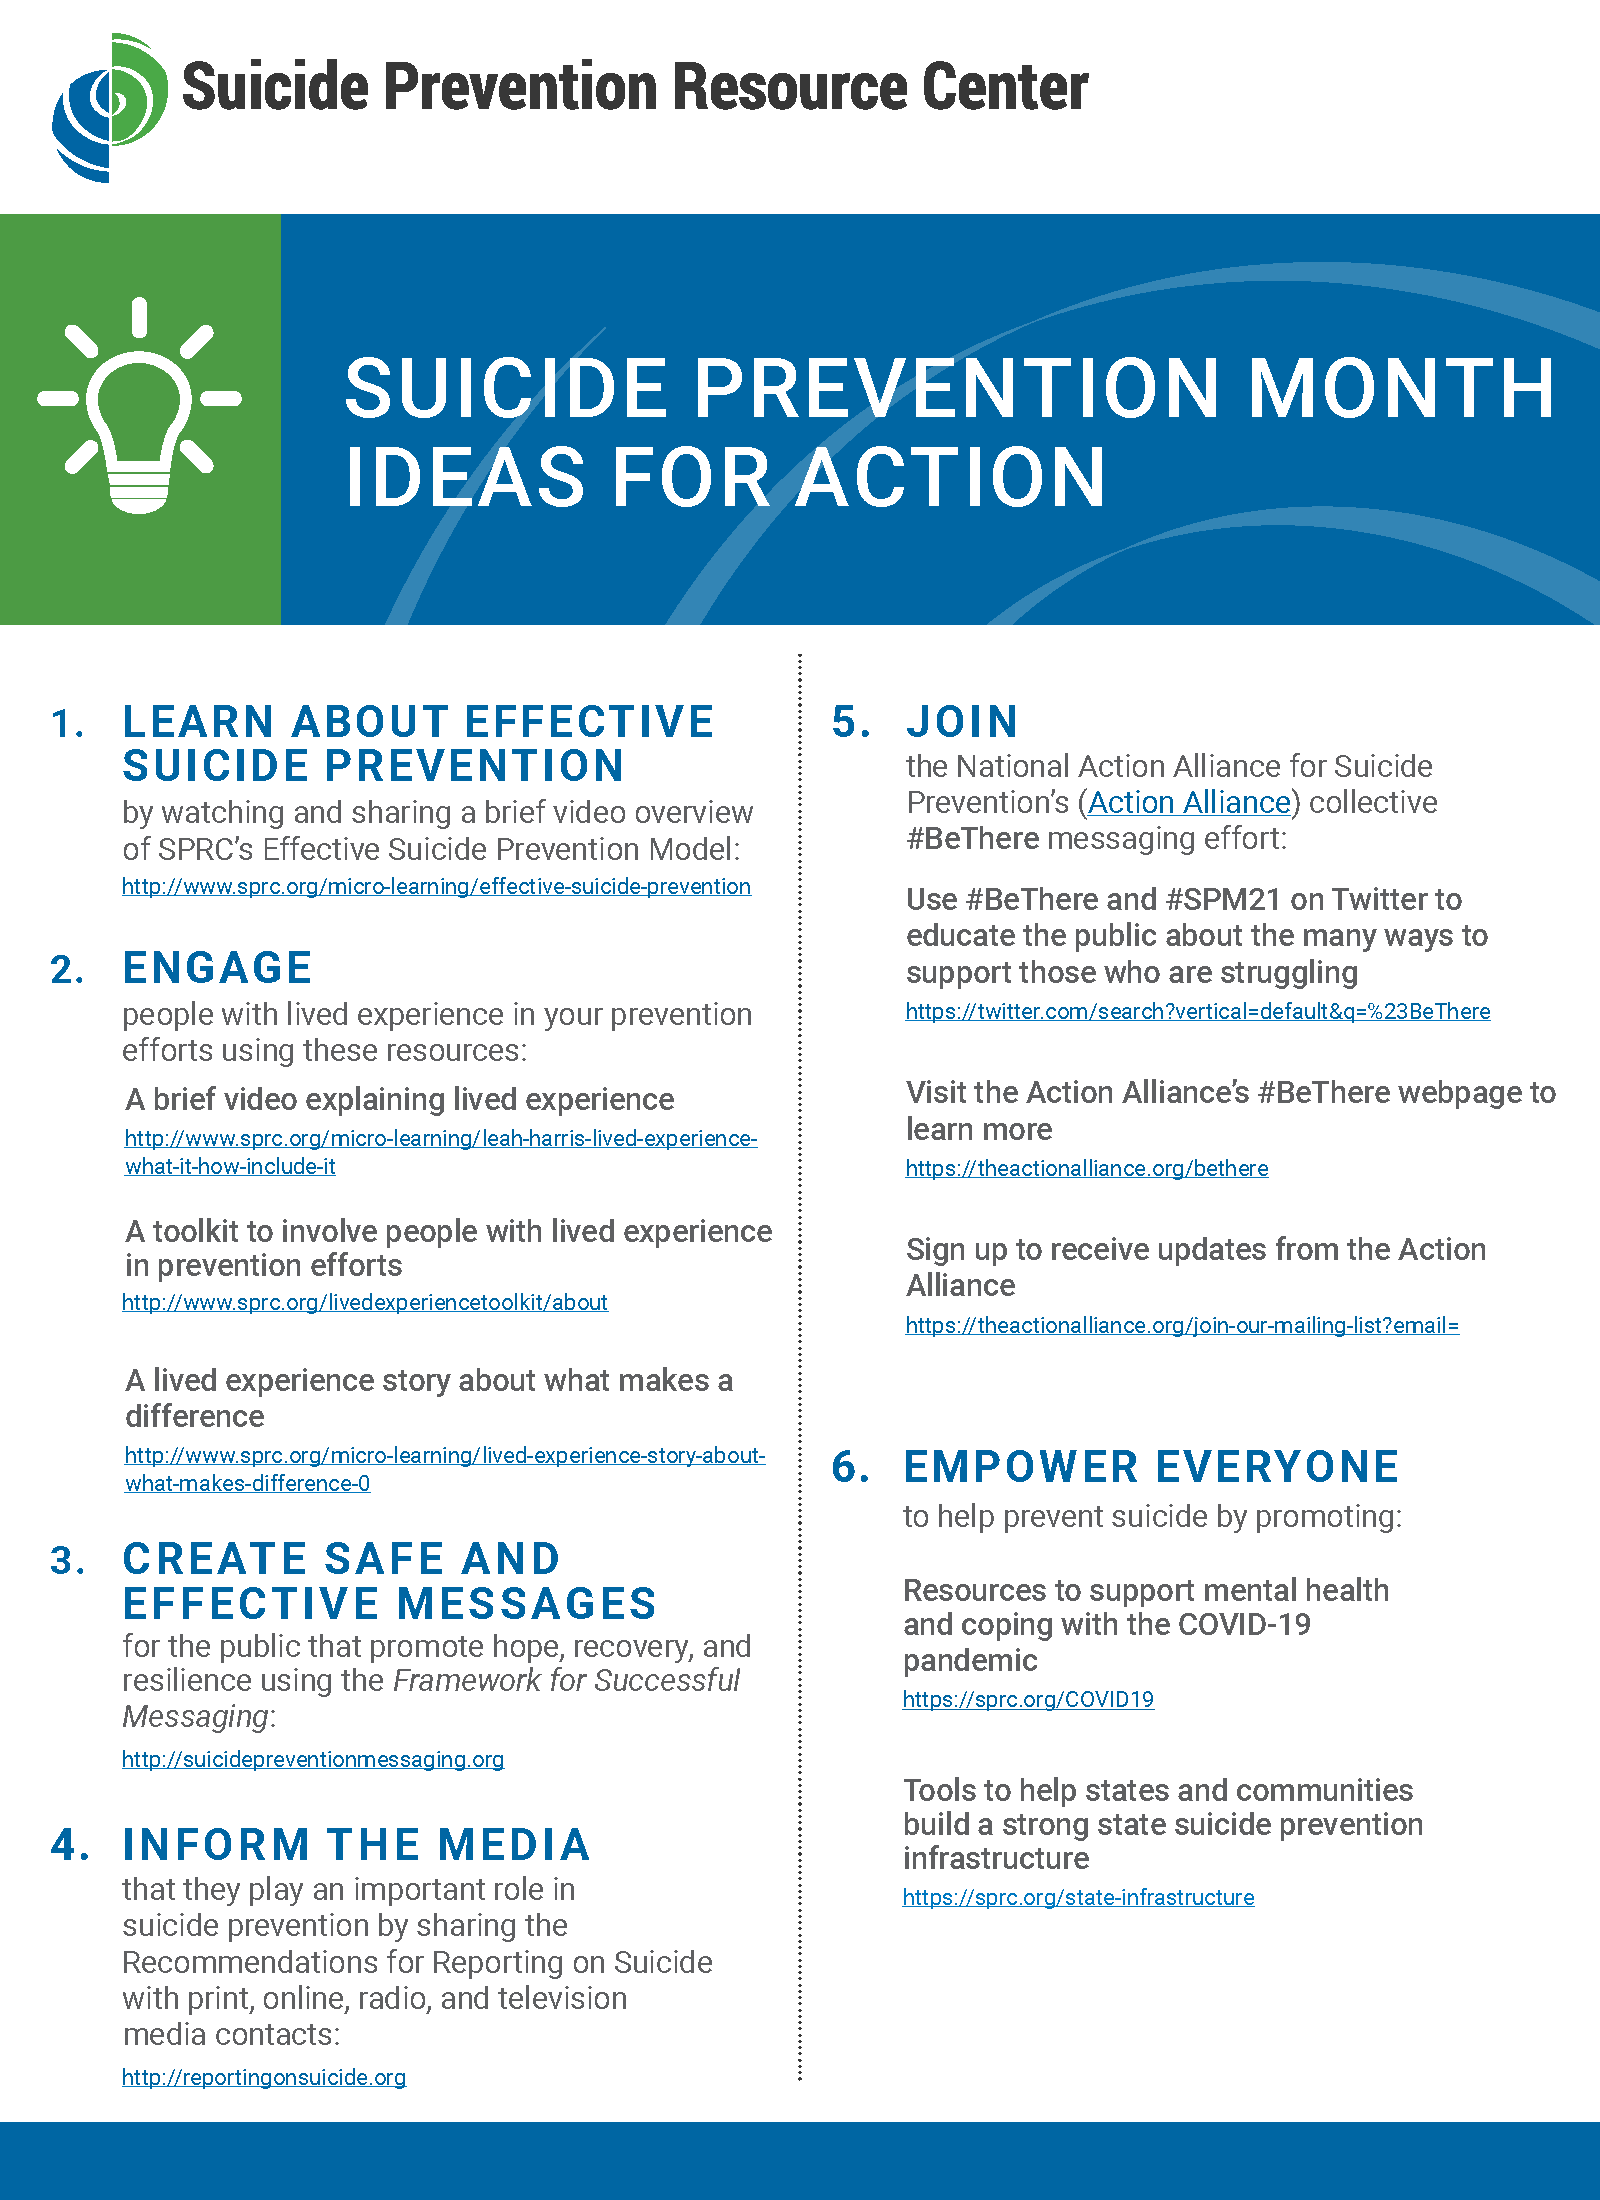 Suicide Prevention Month Ideas for Action. Suicide Prevention Resource Center. 1. Learn about effective suicide prevention. 2. Engage. 3. Create safe and effective messages. 4. Inform the media. 5. Join. 6. Empower everyone.